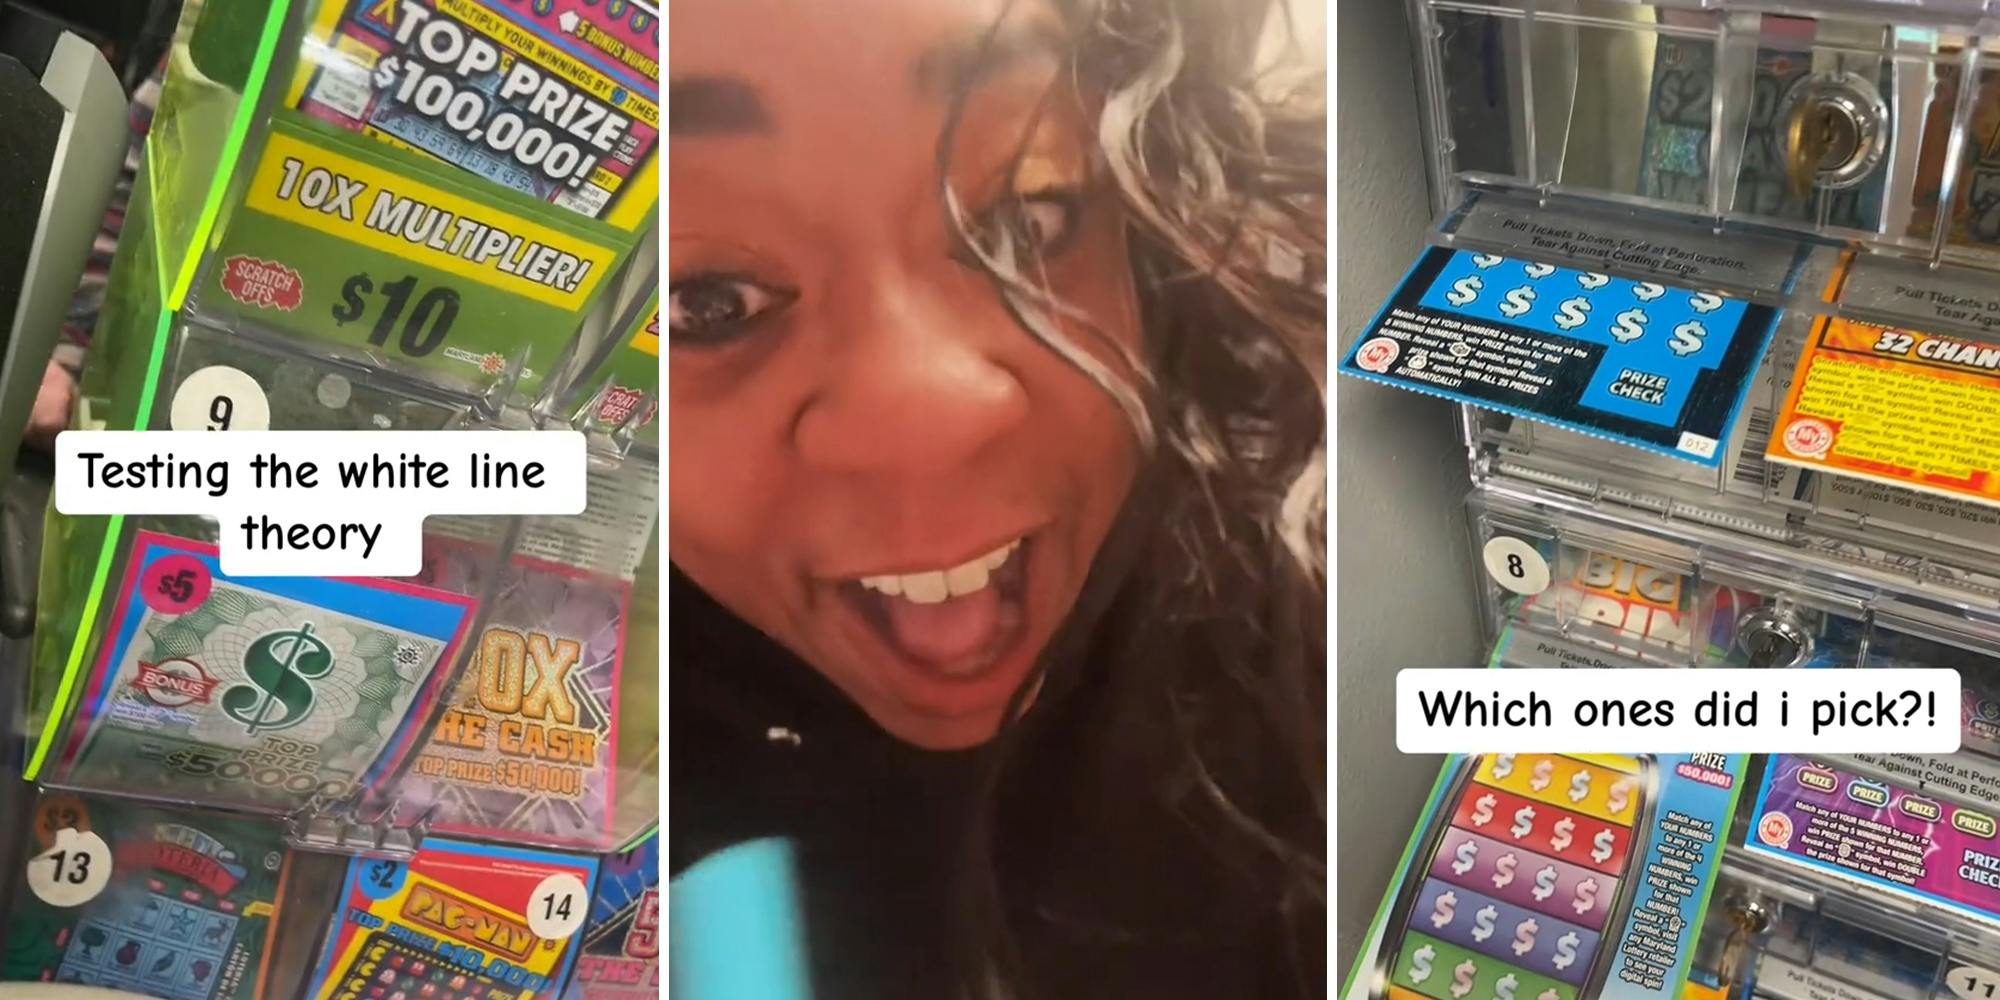 ‘I won’: Woman says you should try the ‘white line theory’ when buying lottery scratch-offs. Does it work?